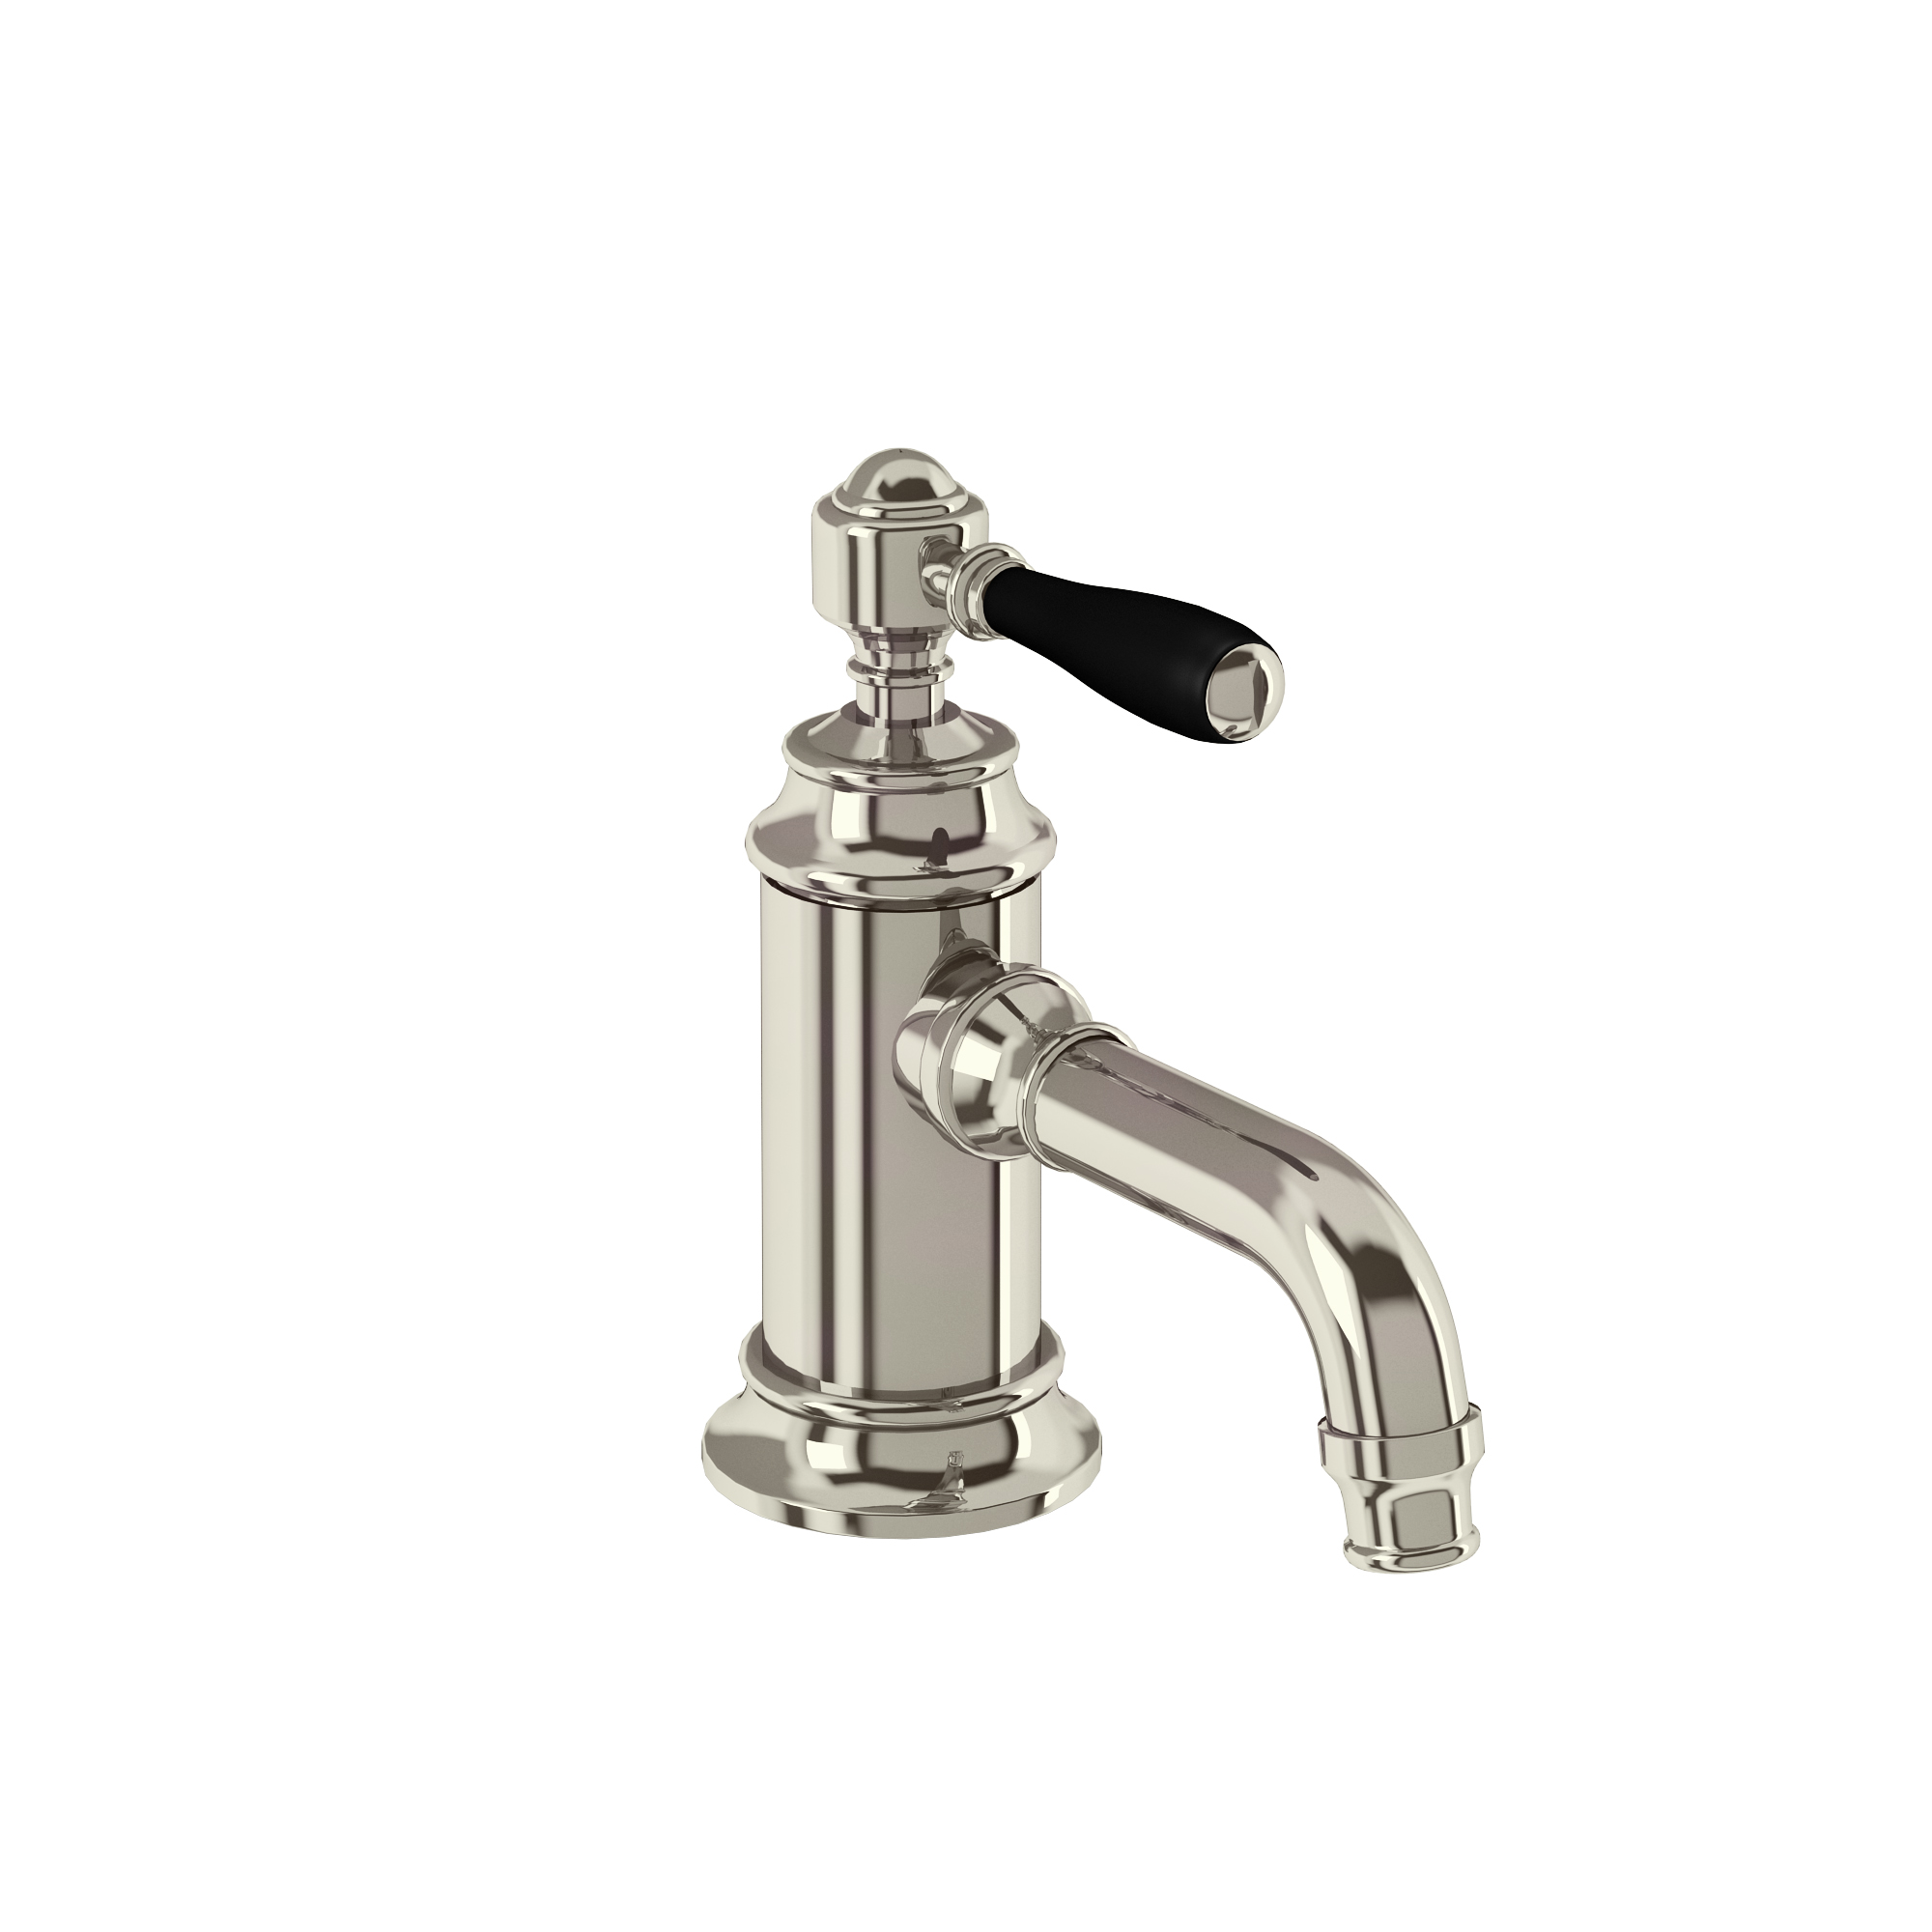 Arcade Single-lever basin mixer without pop up waste - nickel - with black lever